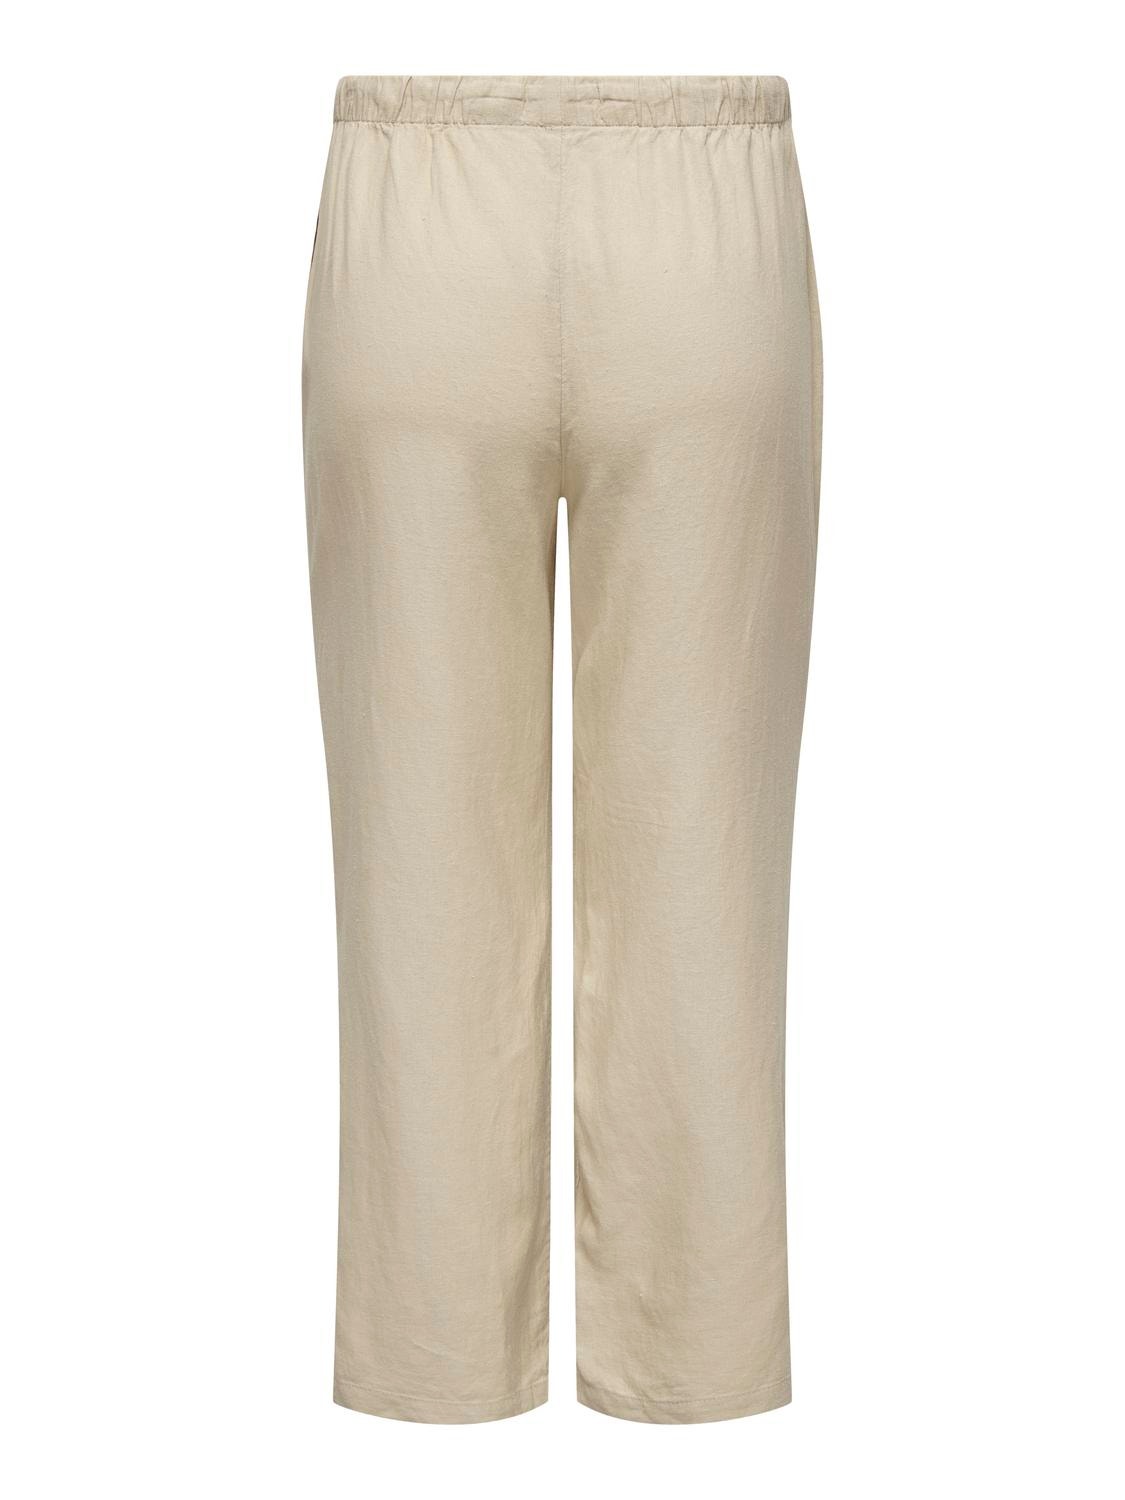 ONLY Loose Fit Mid waist Curve Trousers -Oxford Tan - 15311951